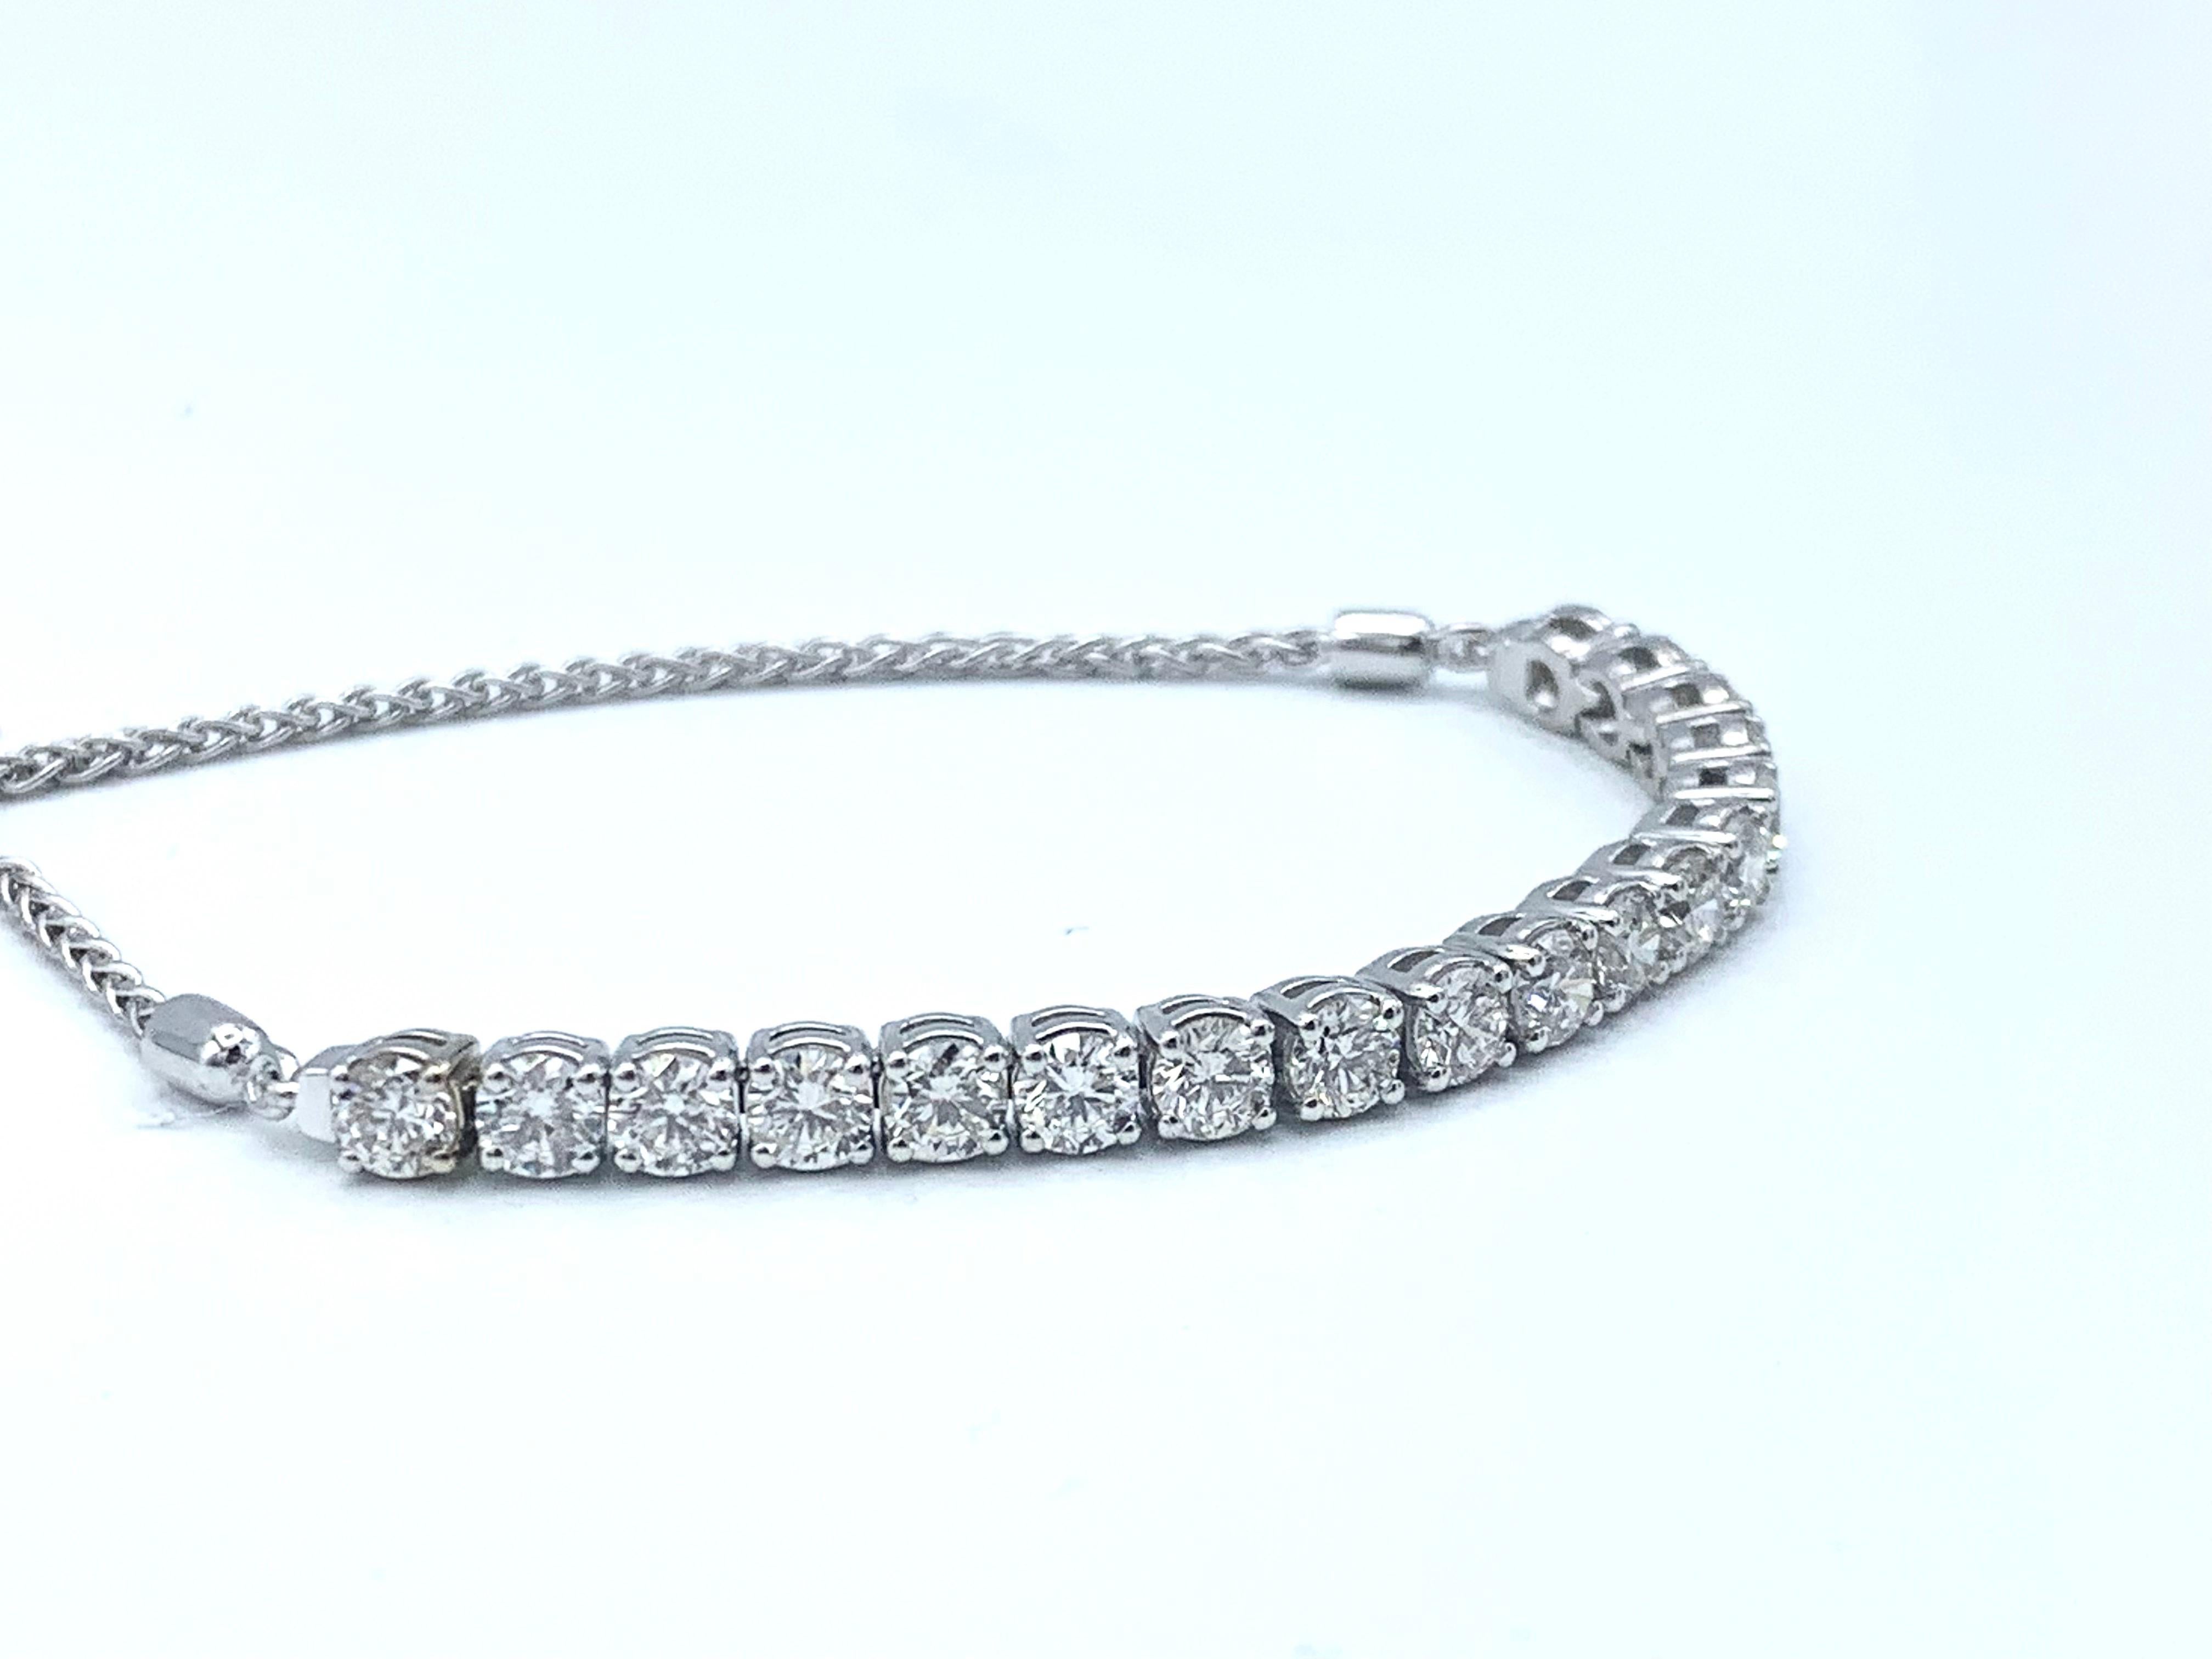 This unique twist on a tennis bracelet consists of 14 karat white gold and 18 round VS2, I-J diamonds totaling 3.1 carats. The bracelet is finished by a 14 karat white gold wheat chain that is adjustable like a draw string with a white gold circle